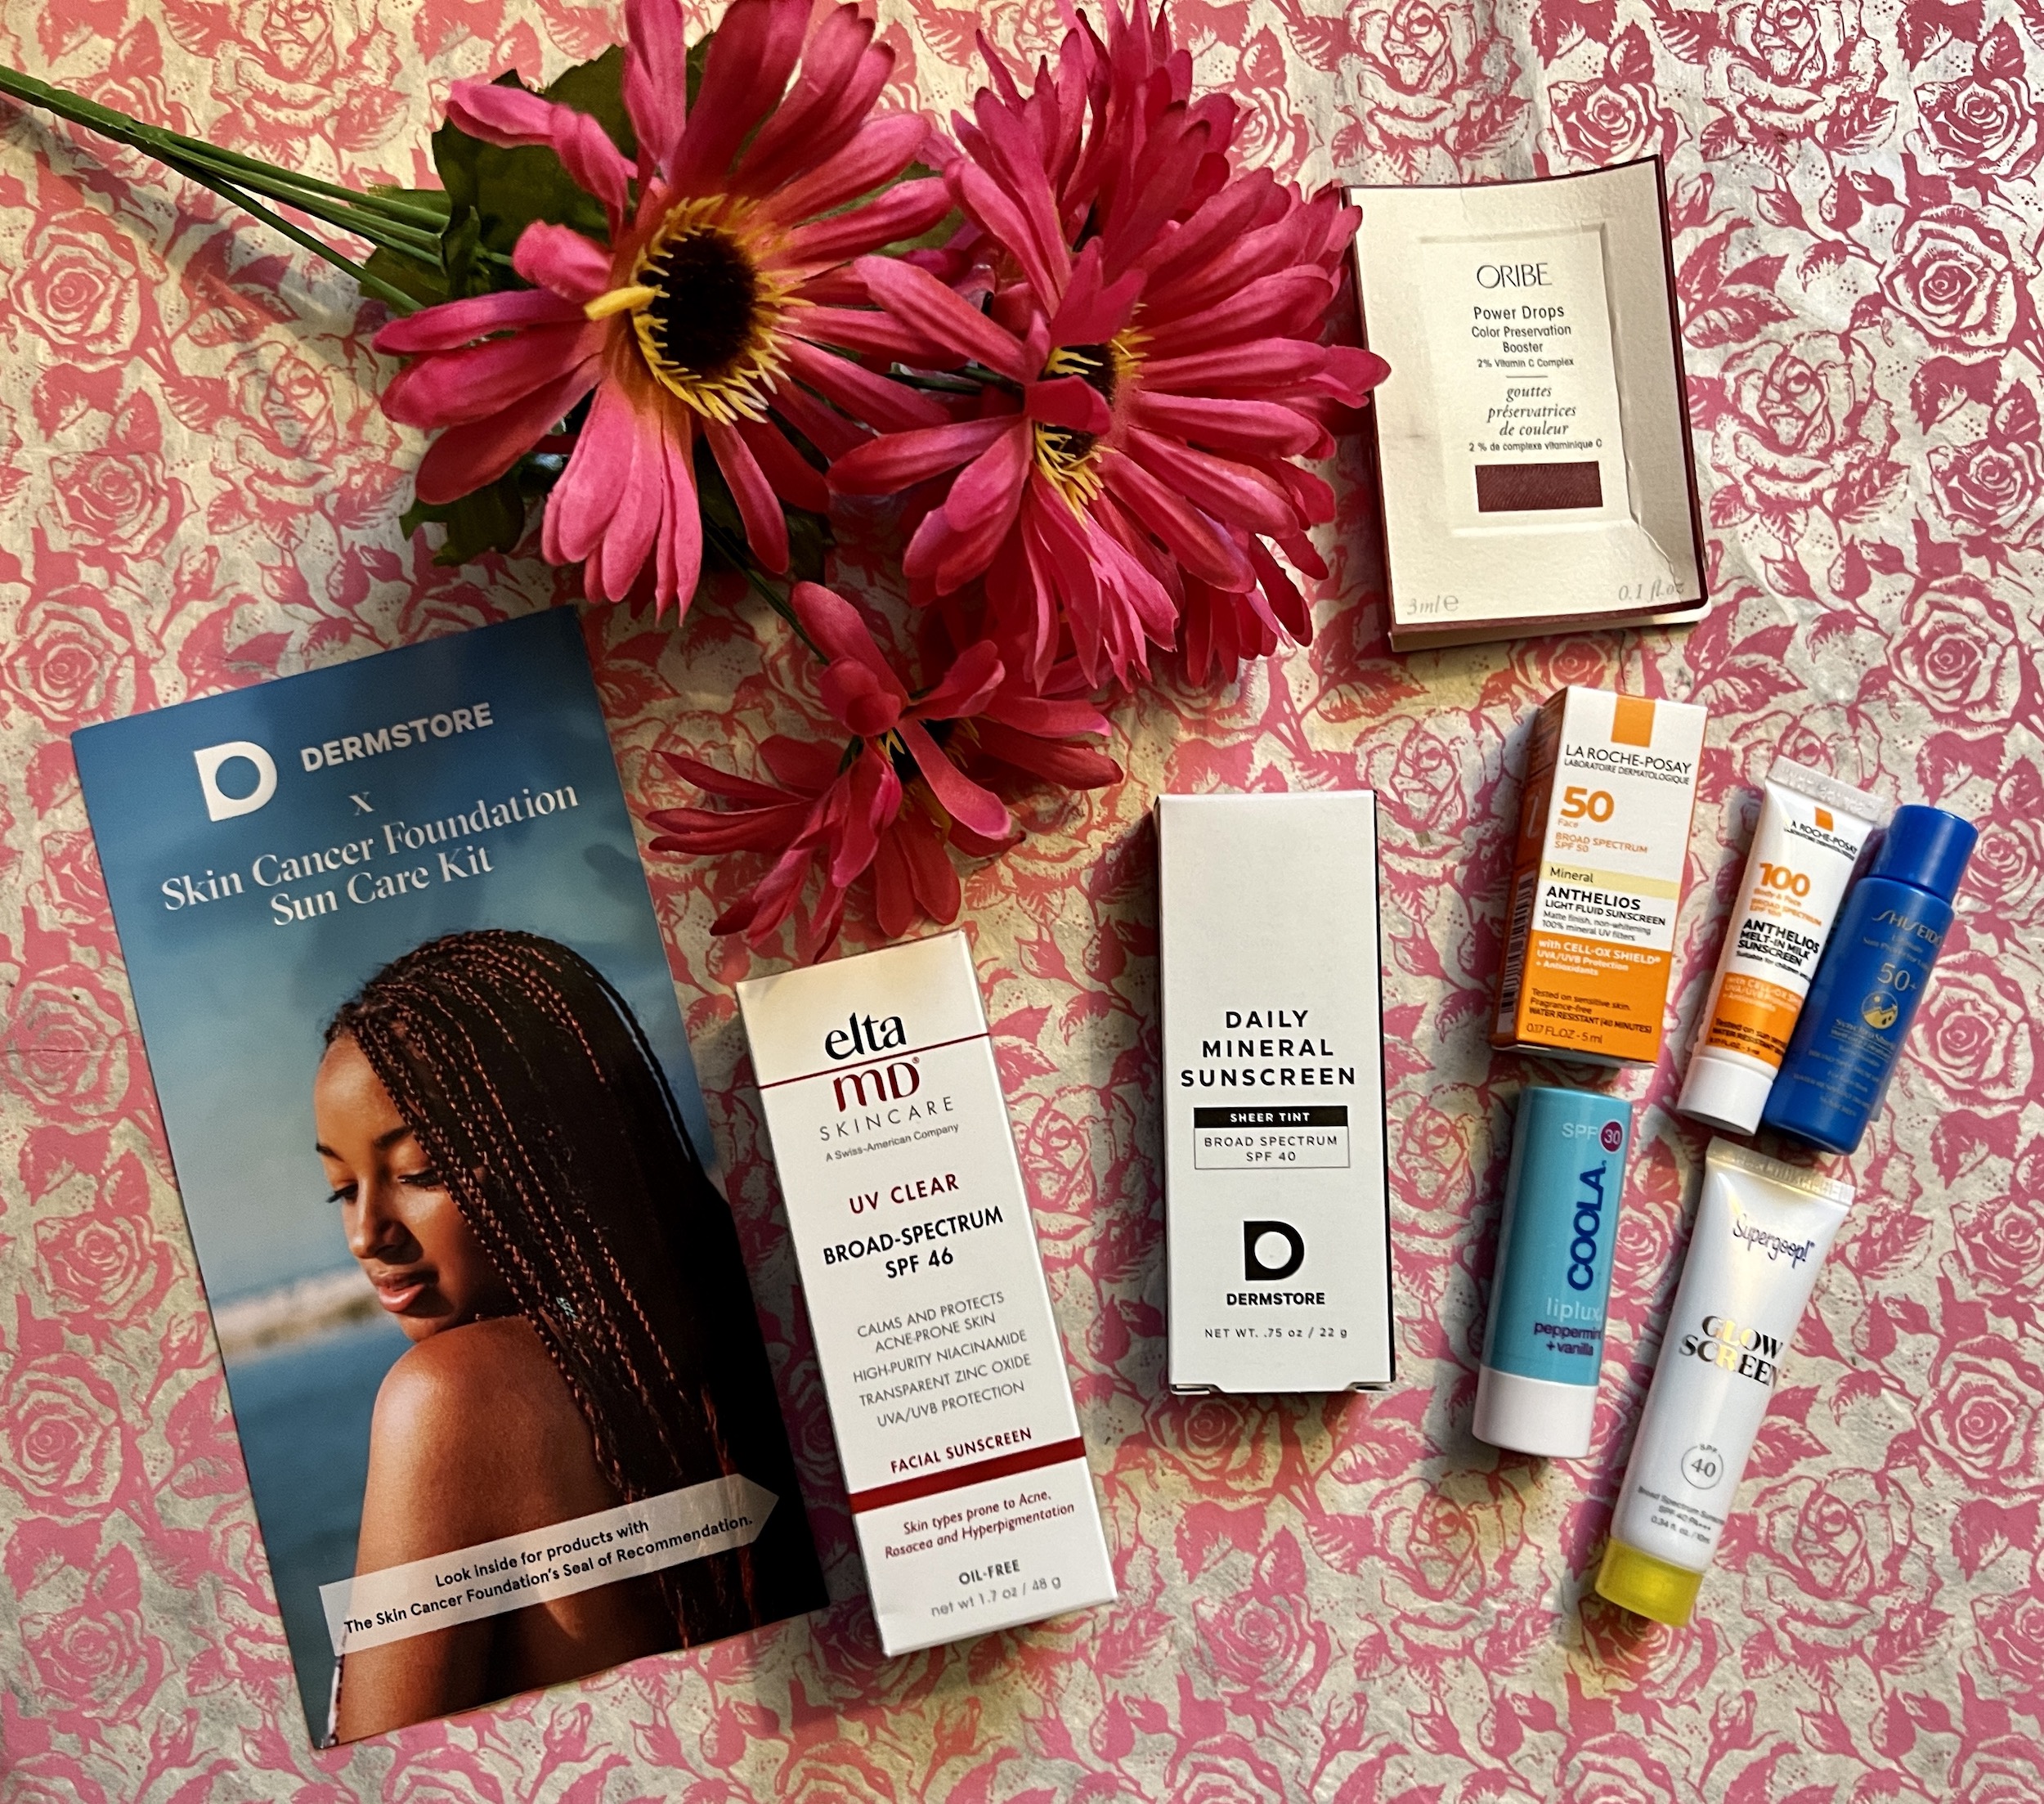 Dermstore x The Skin Cancer Foundation Sun Protection Kit - $212